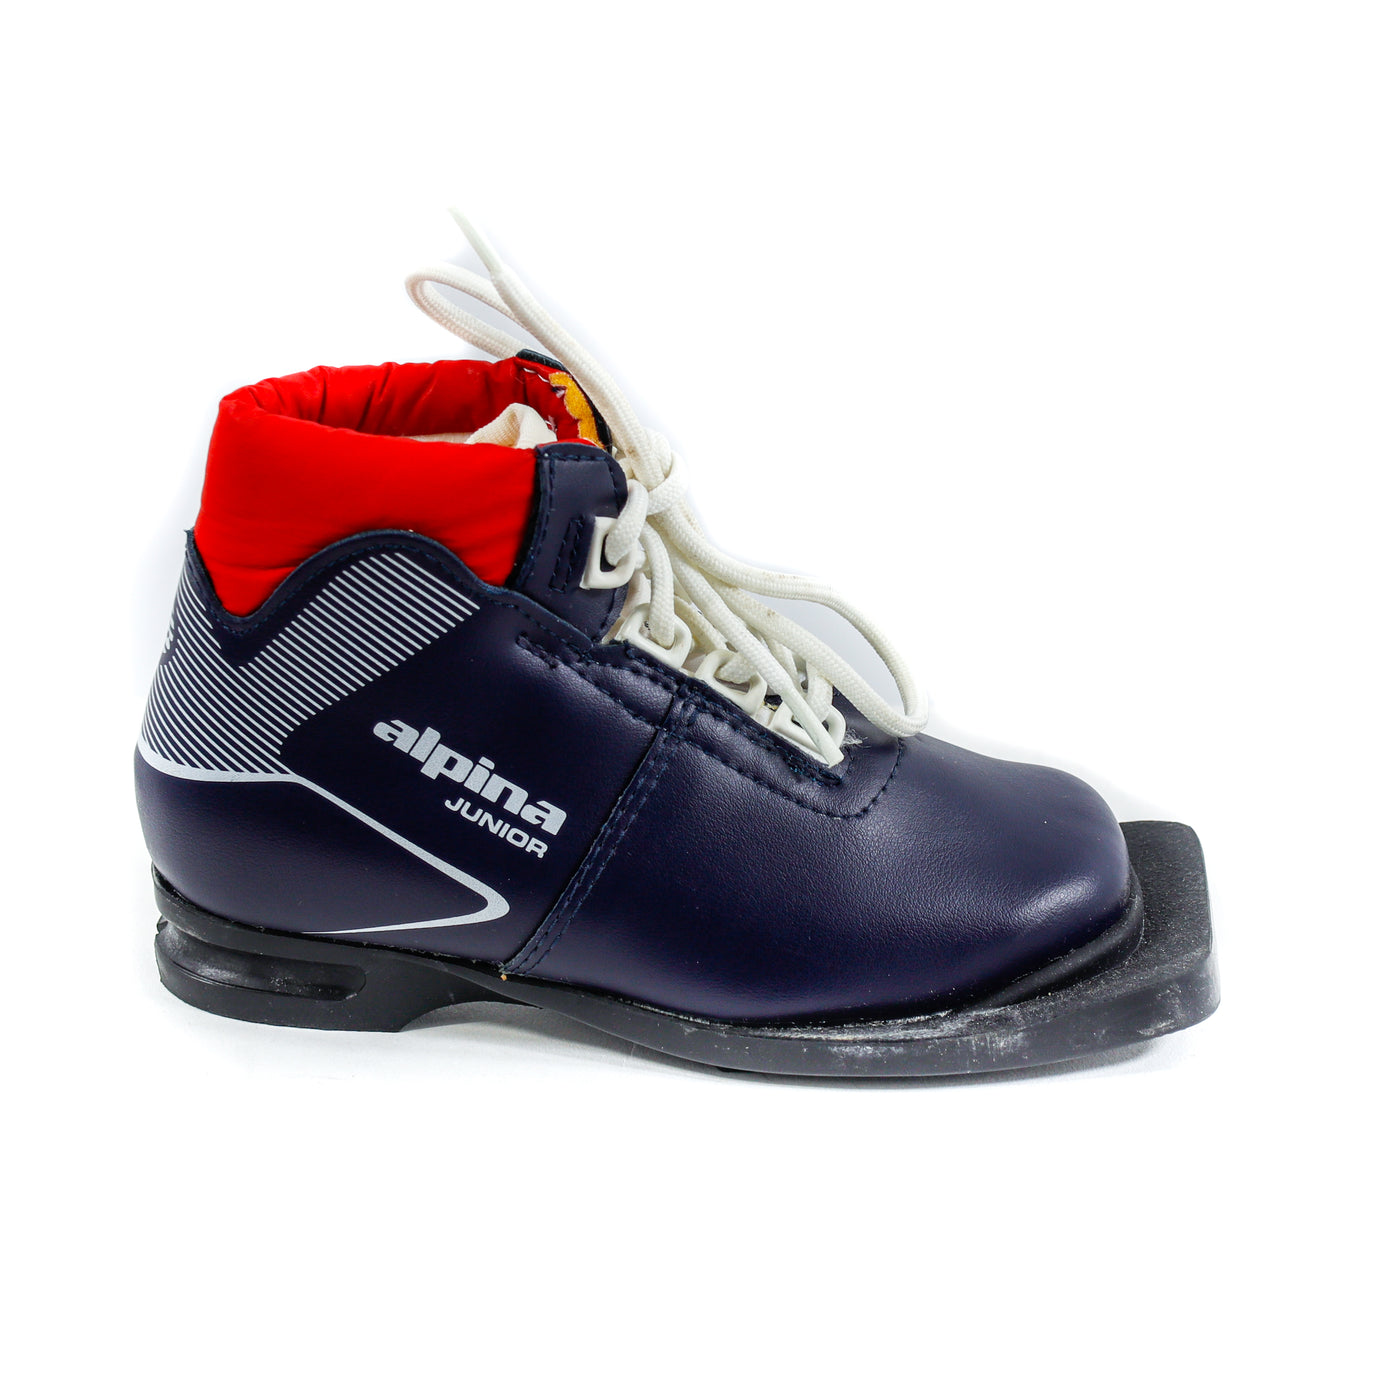 18.5 Alpina 75mm Cross Country Boots | New